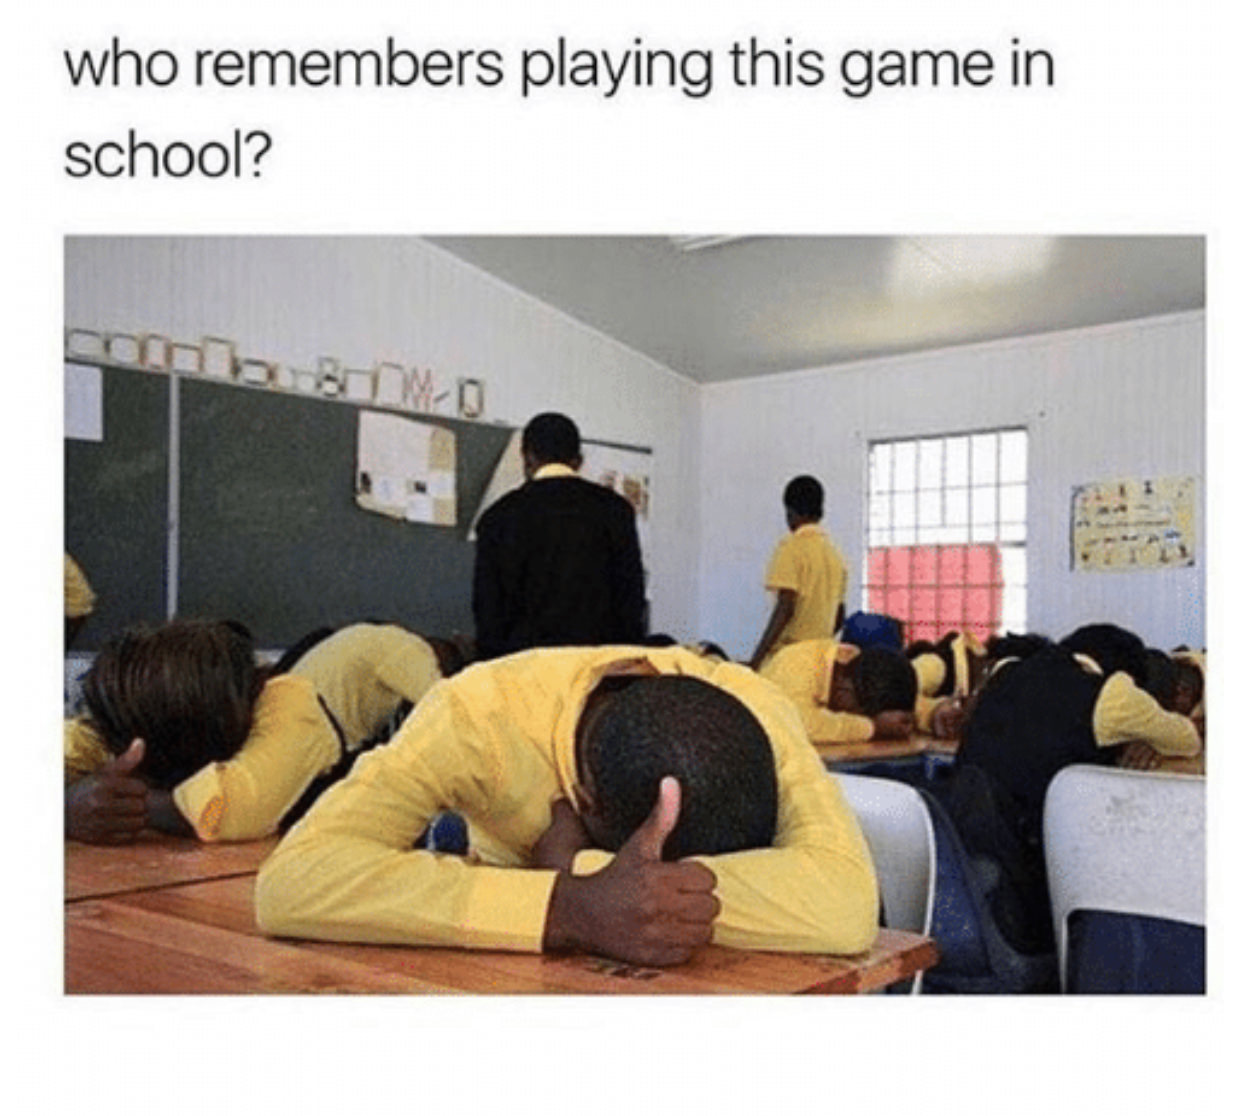 heads down thumbs up meme - who remembers playing this game in school?